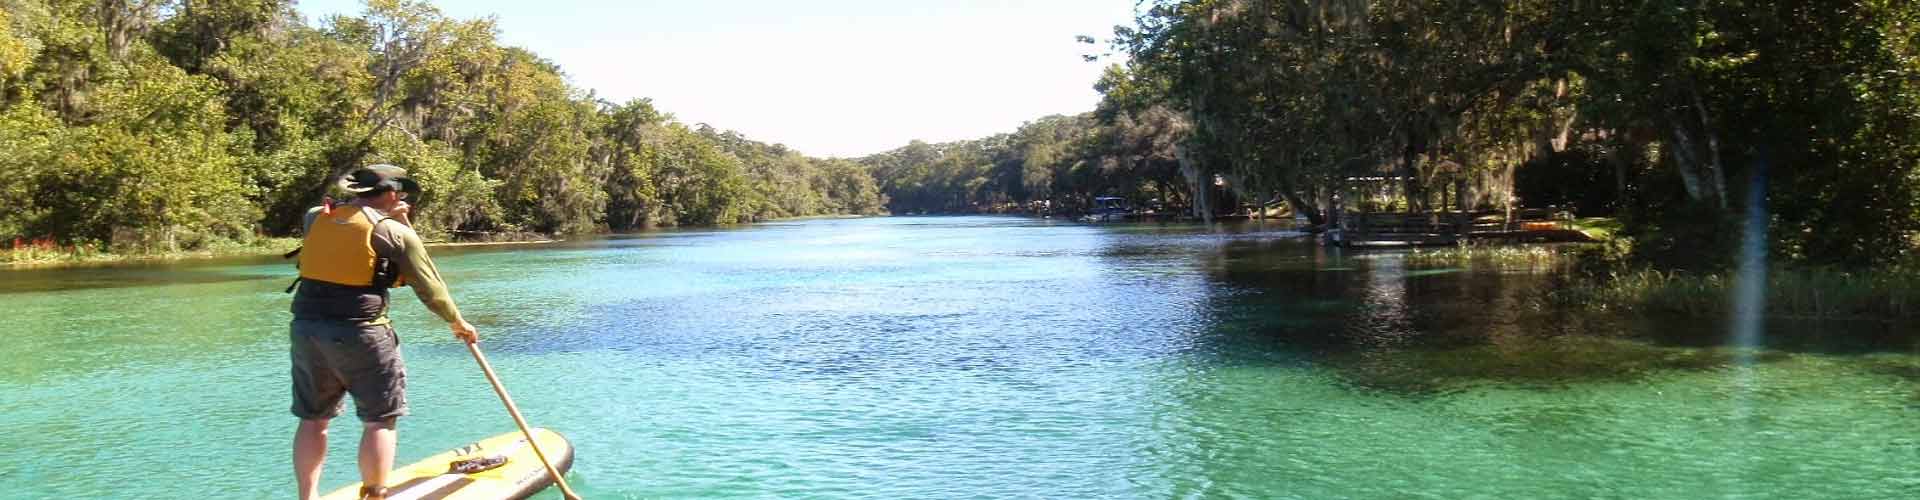 Paddling the Rainbow River in Dunnellon, Florida